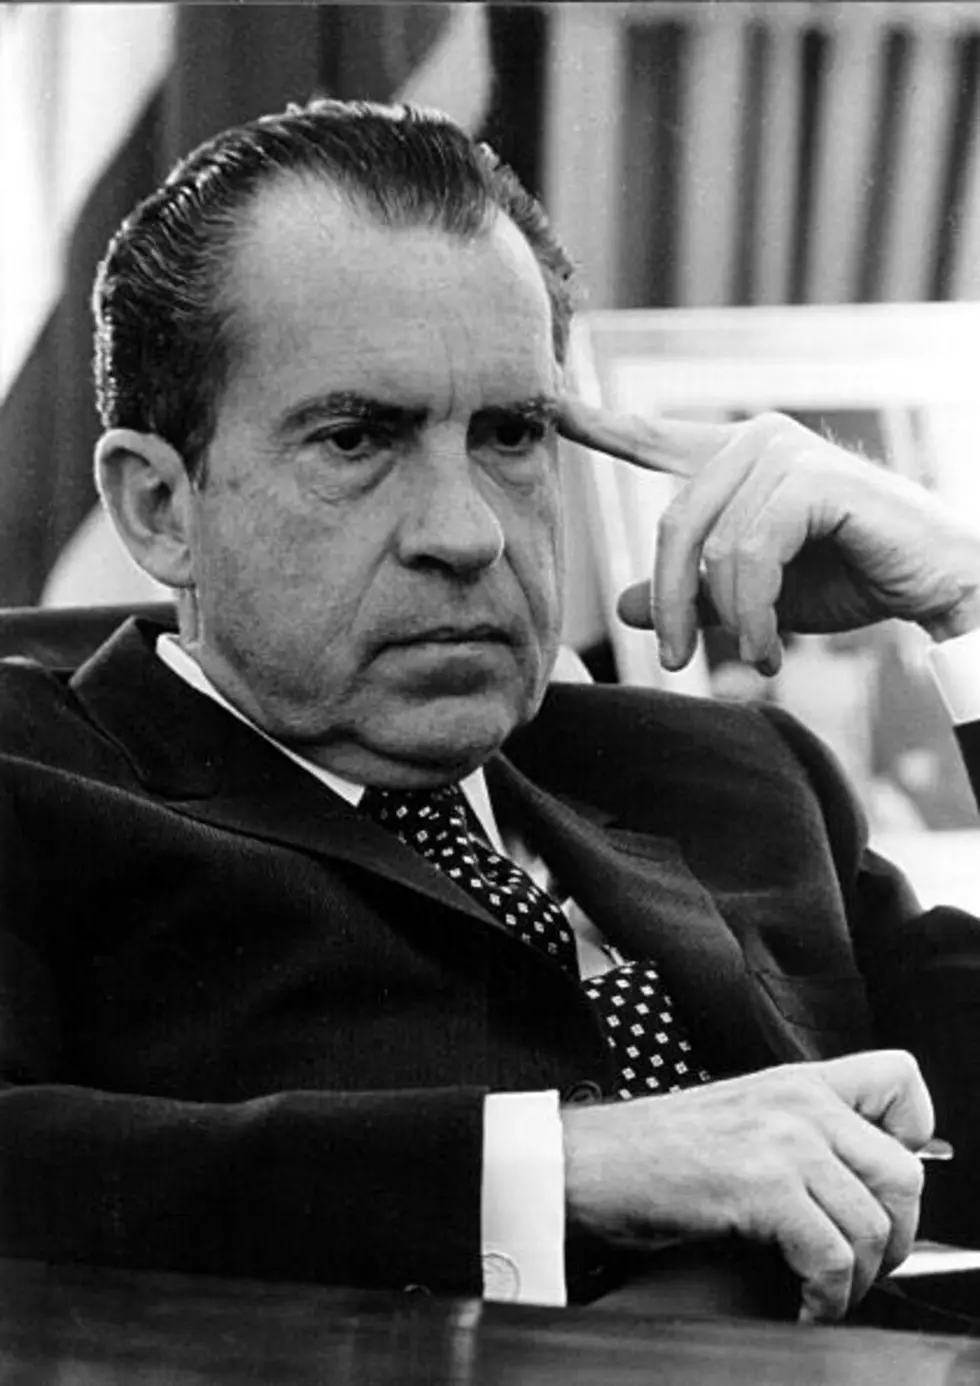 Nearly All &#8220;Nixon Tapes&#8221; Now Released &#8211; Reveals President As Watergate Loomed